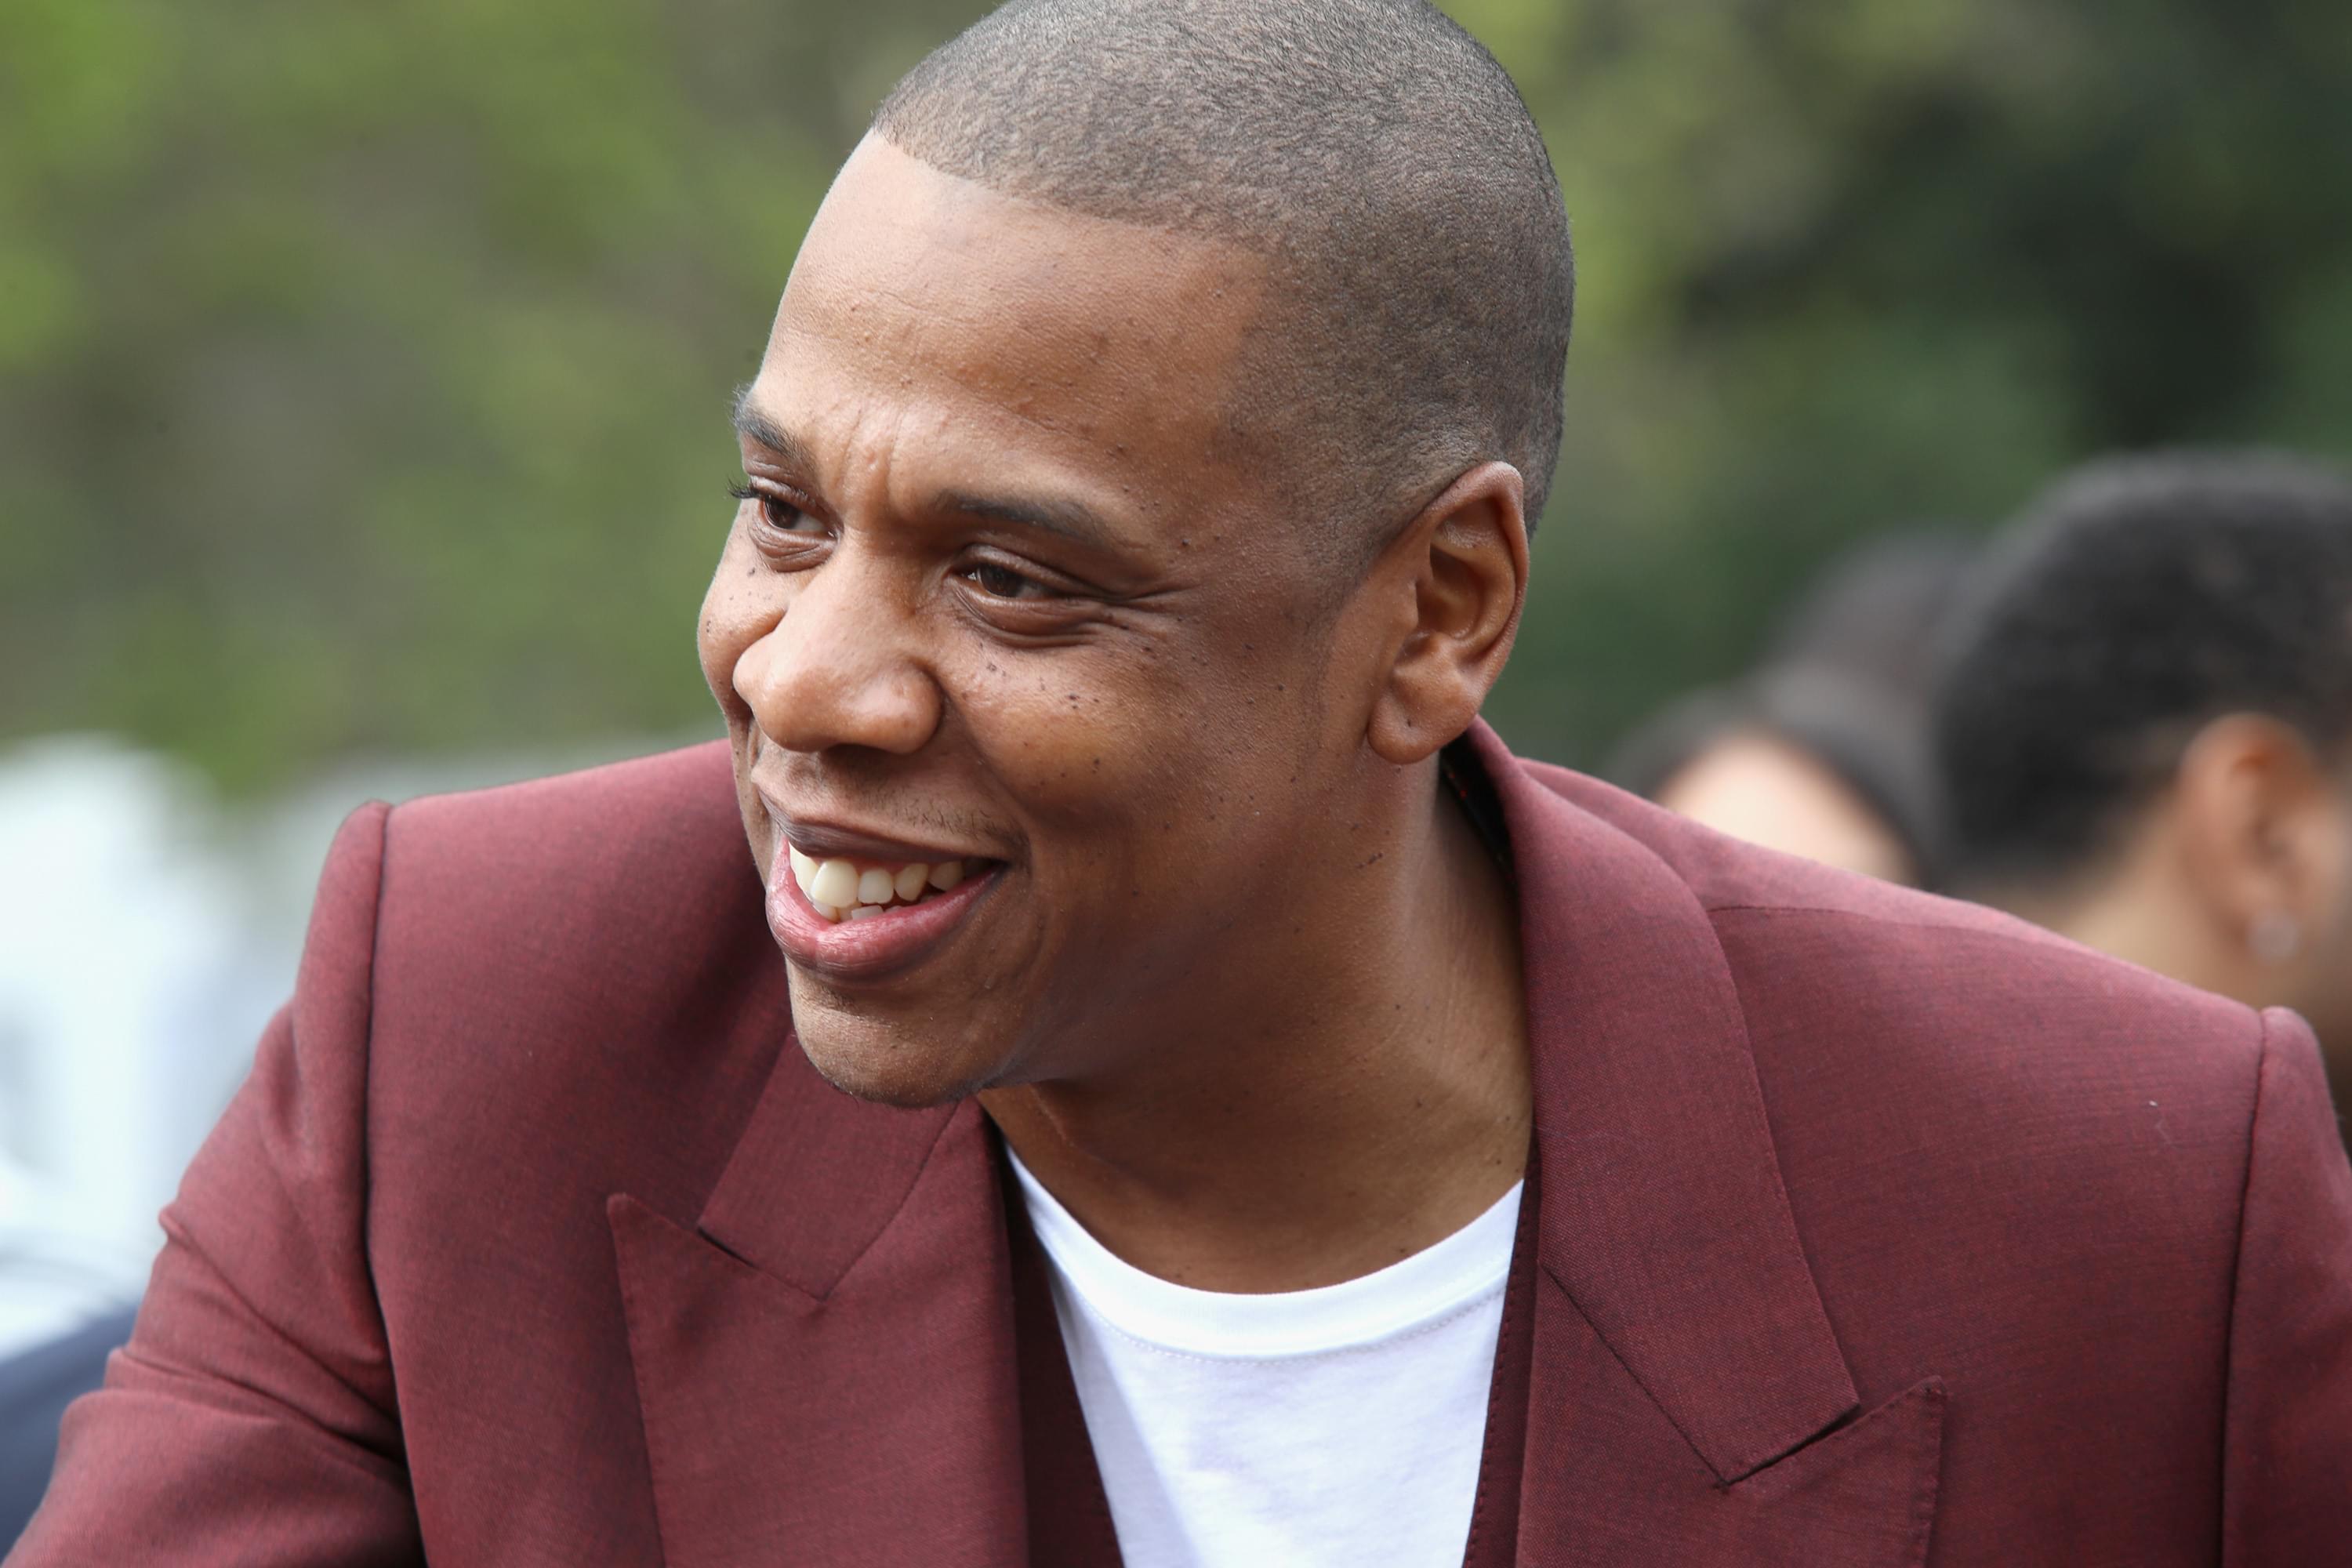 WATCH Jay-Z’s New Visual ‘The Story of O.J.’ [WATCH]